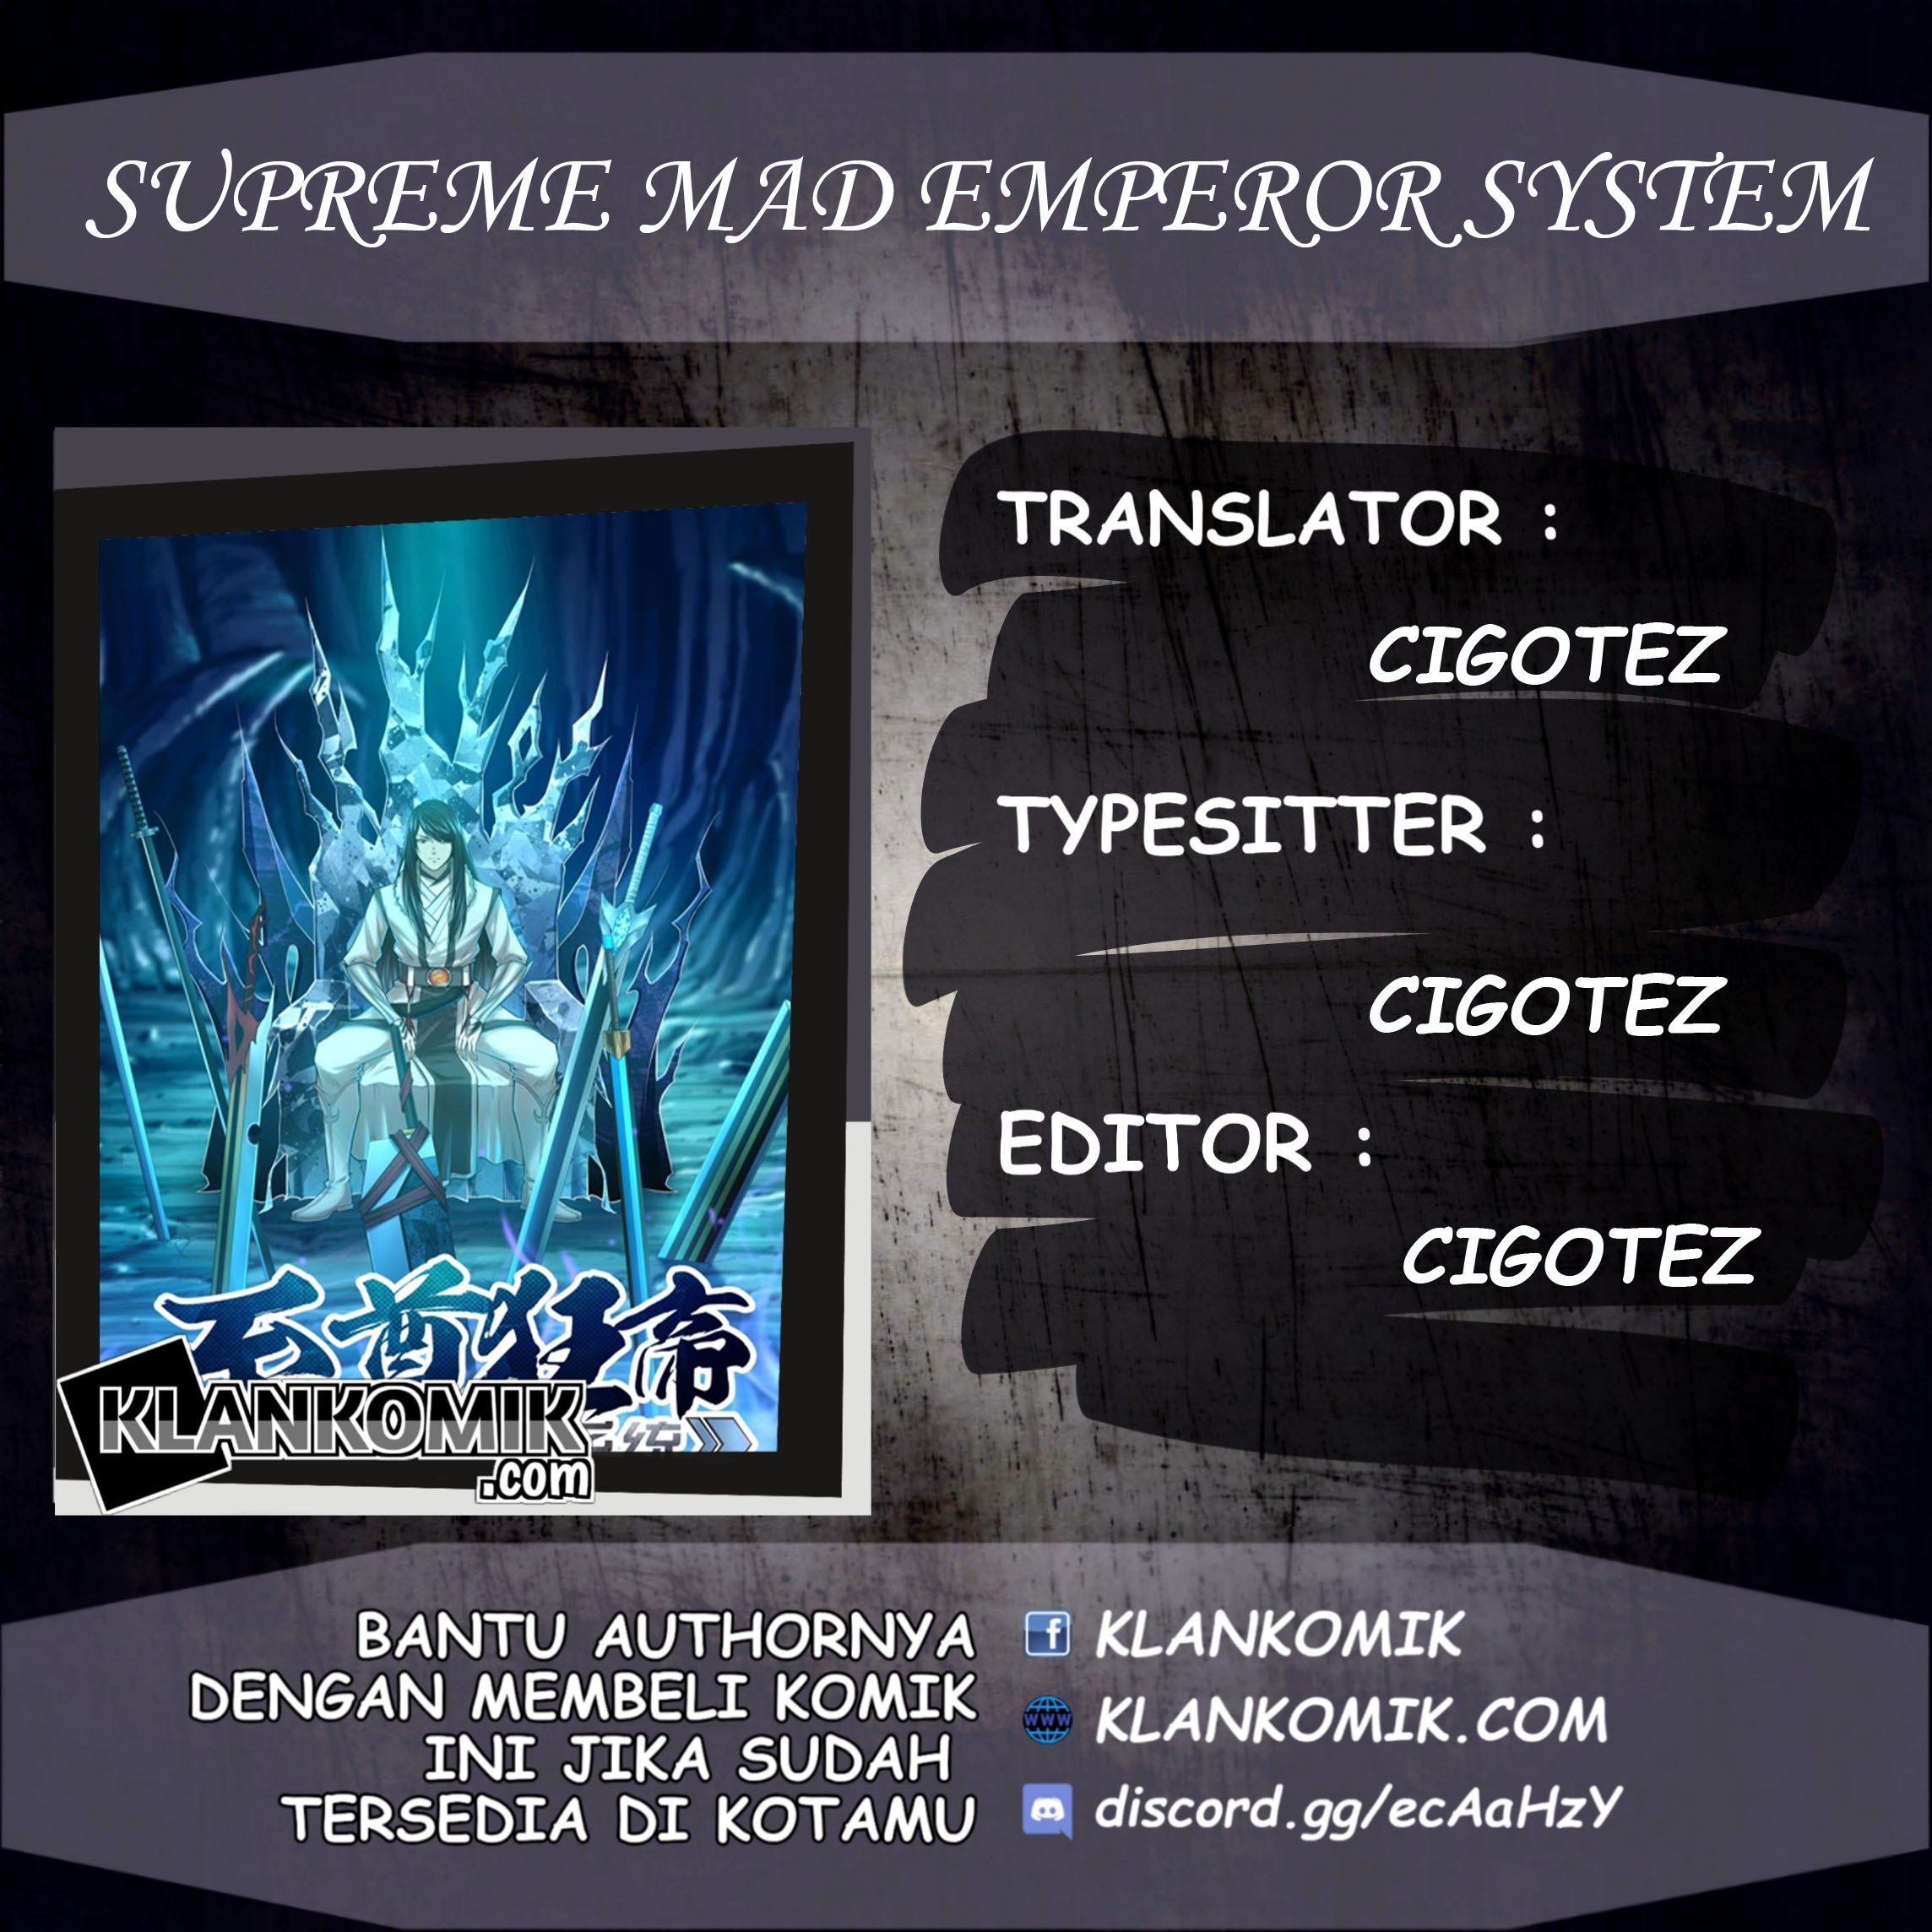 Extreme Mad Emperor System (Supreme Mad Emperor System) Chapter 15